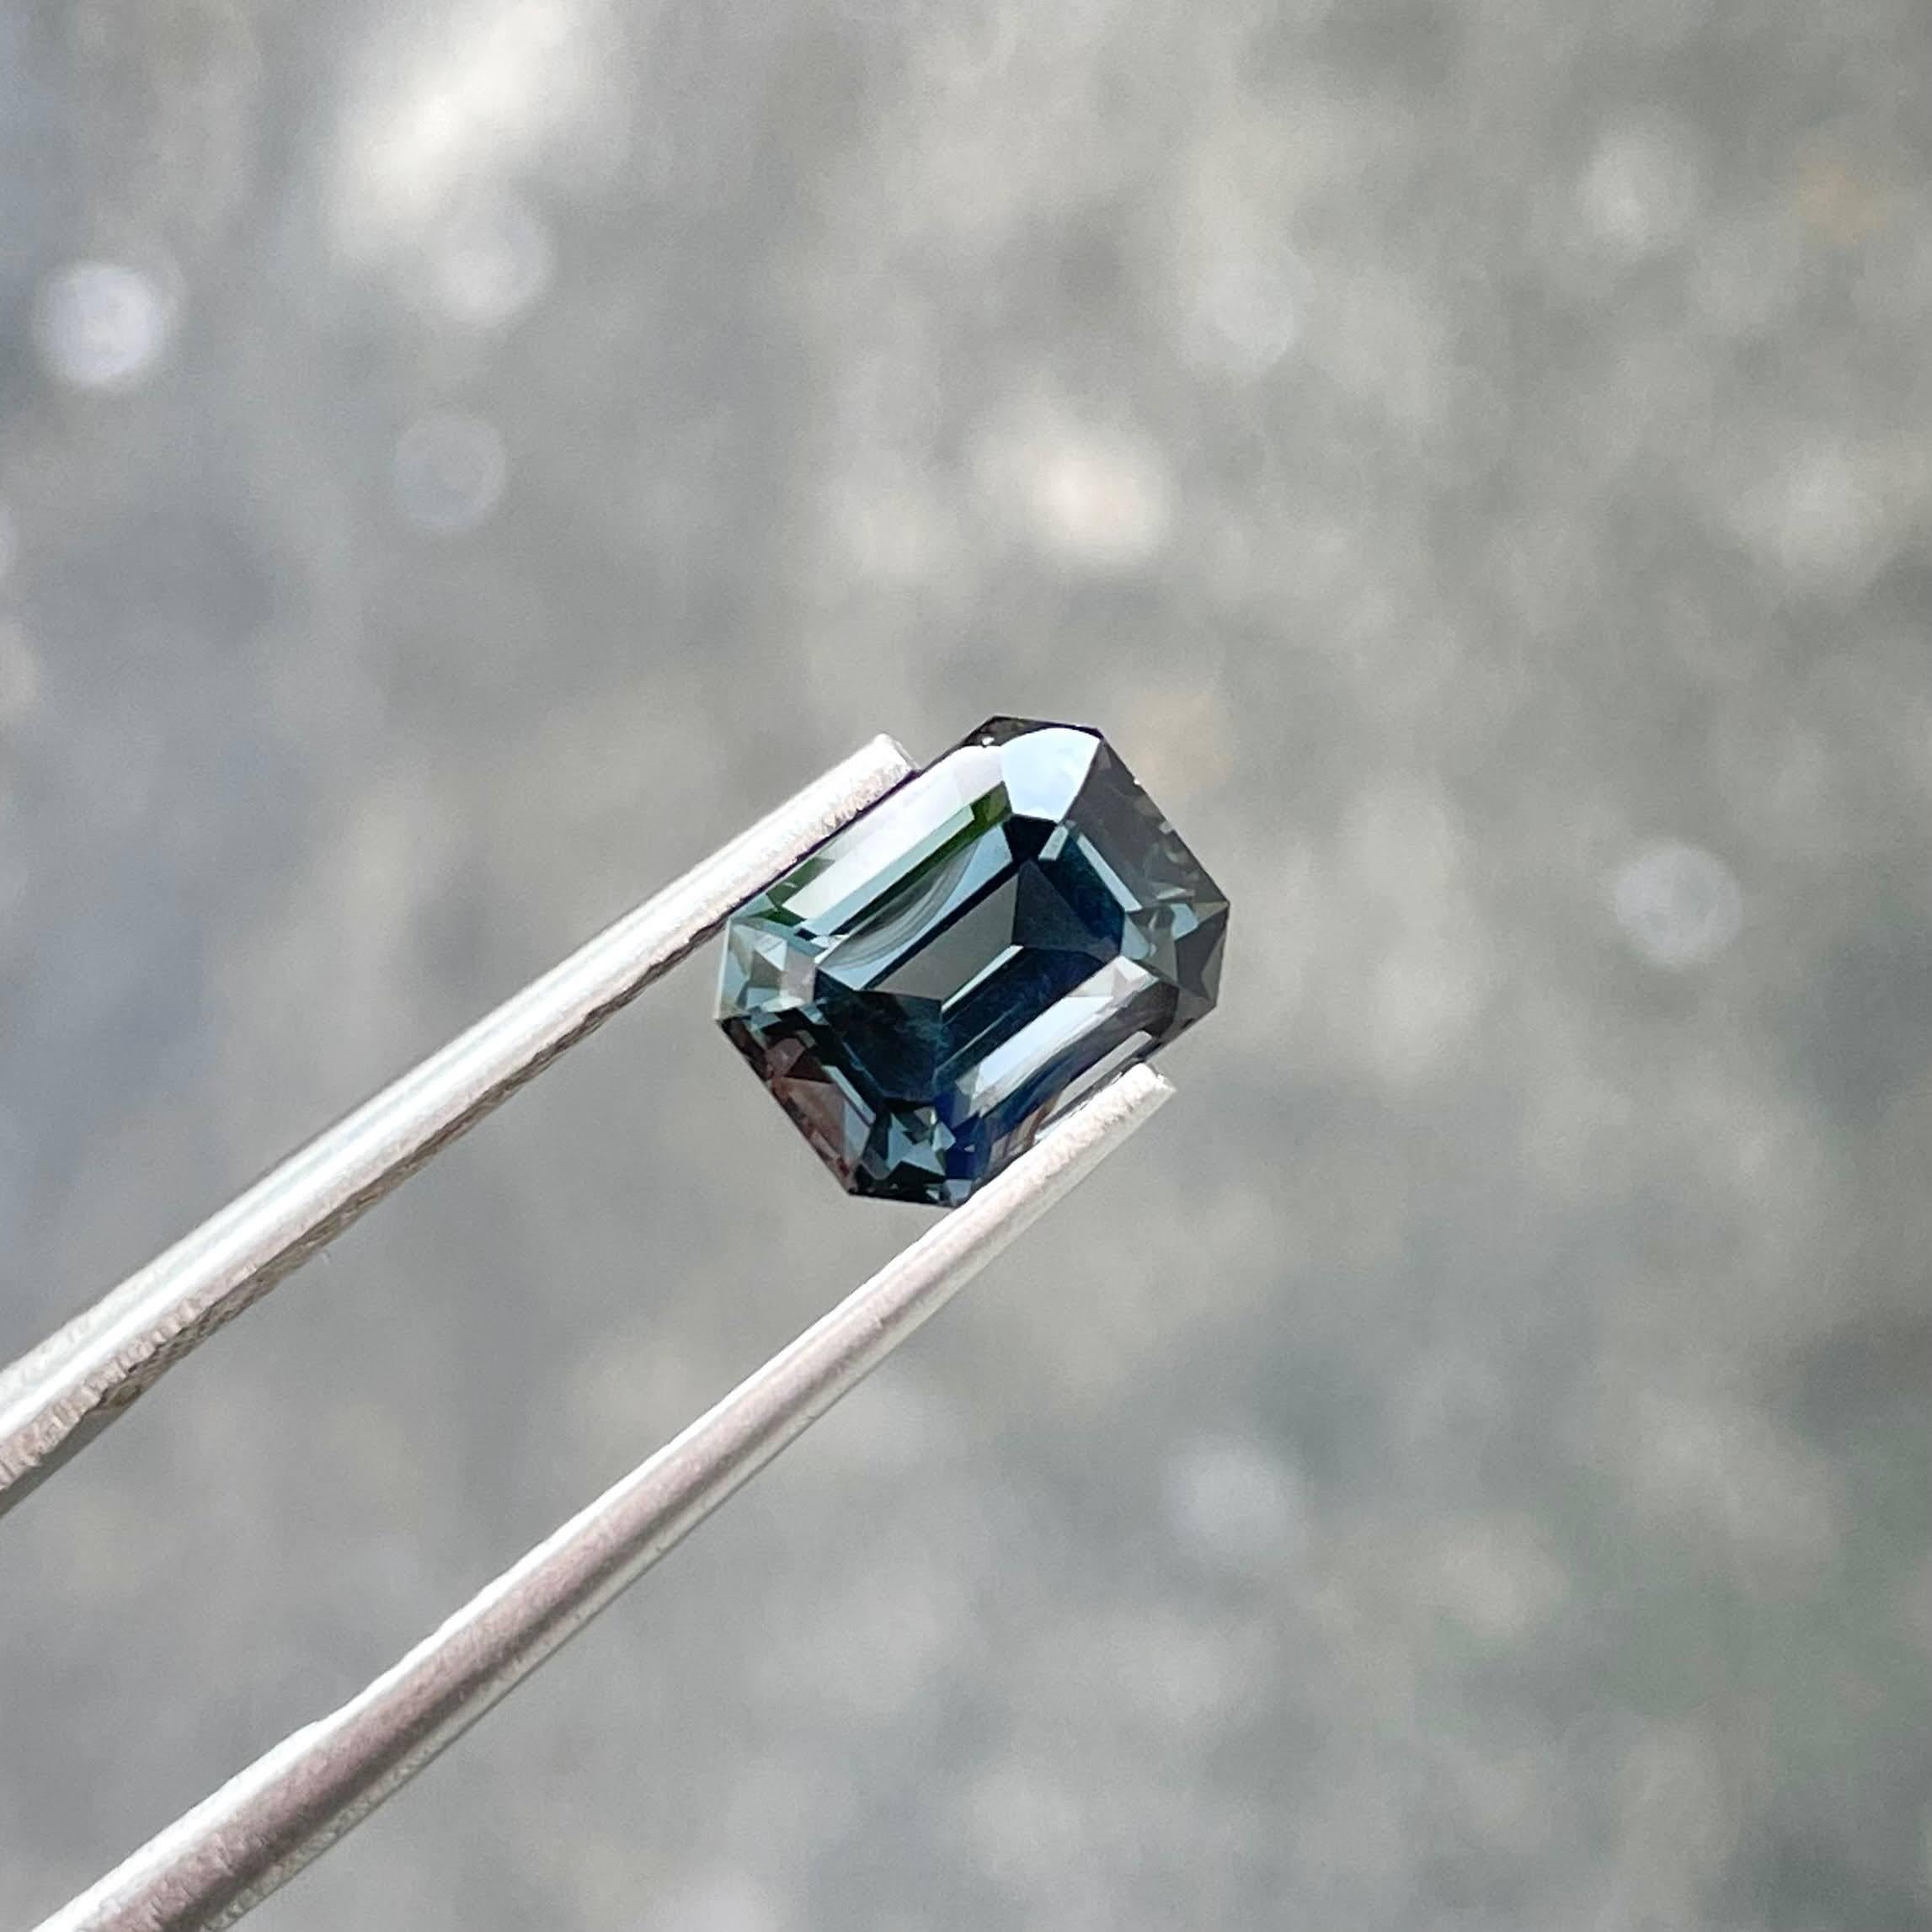 Weight 2.35 carats 
Dimensions 8.0x6.2x5.1 mm
Treatment None
Clarity VVS
Origin Burma
Shape Octagon
Cut Emerald




The 2.35-carat Metallic Gray Burmese Spinel Stone is a captivating natural gemstone, distinguished by its alluring emerald cut that